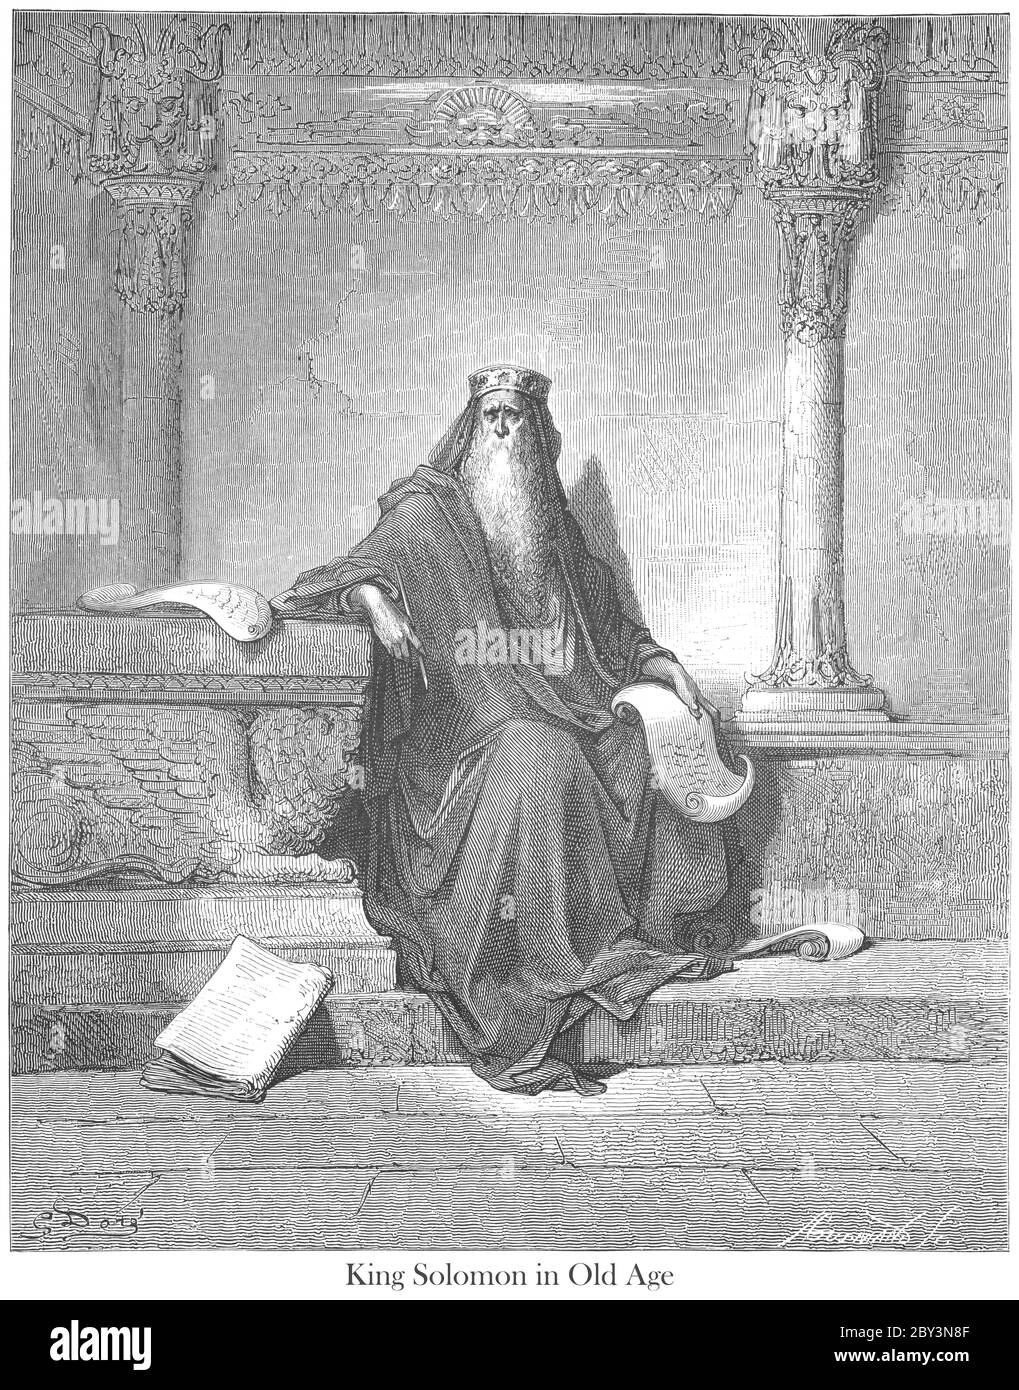 King Solomon in Old Age 2 Chronicles 1:10 From the book 'Bible Gallery' Illustrated by Gustave Dore with Memoir of Dore and Descriptive Letter-press by Talbot W. Chambers D.D. Published by Cassell & Company Limited in London and simultaneously by Mame in Tours, France in 1866 Stock Photo